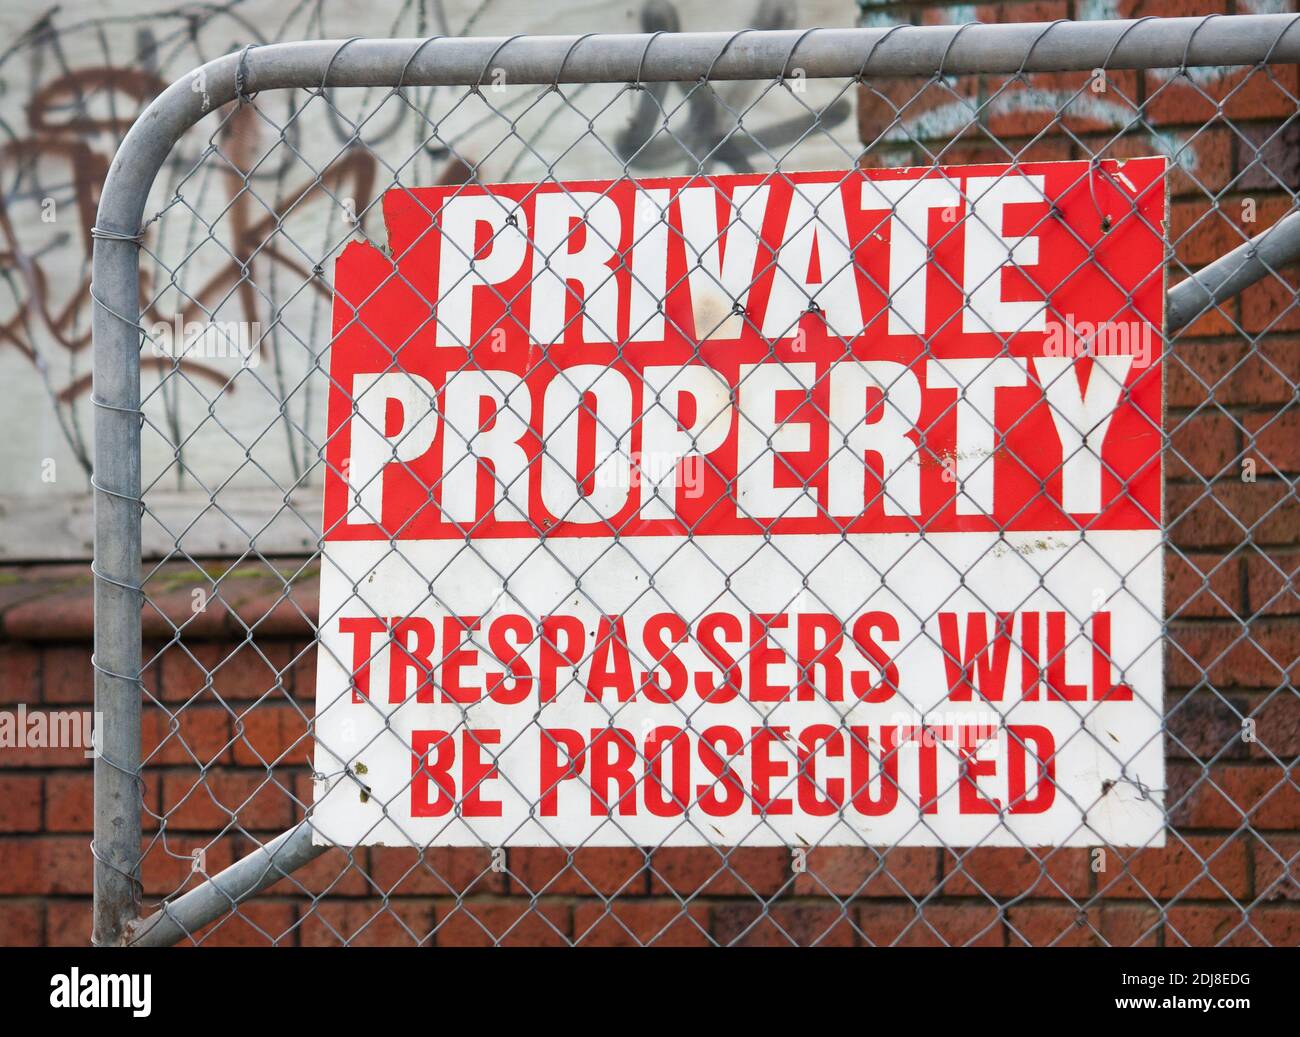 Private property, trespassers will be prosecuted sign Stock Photo